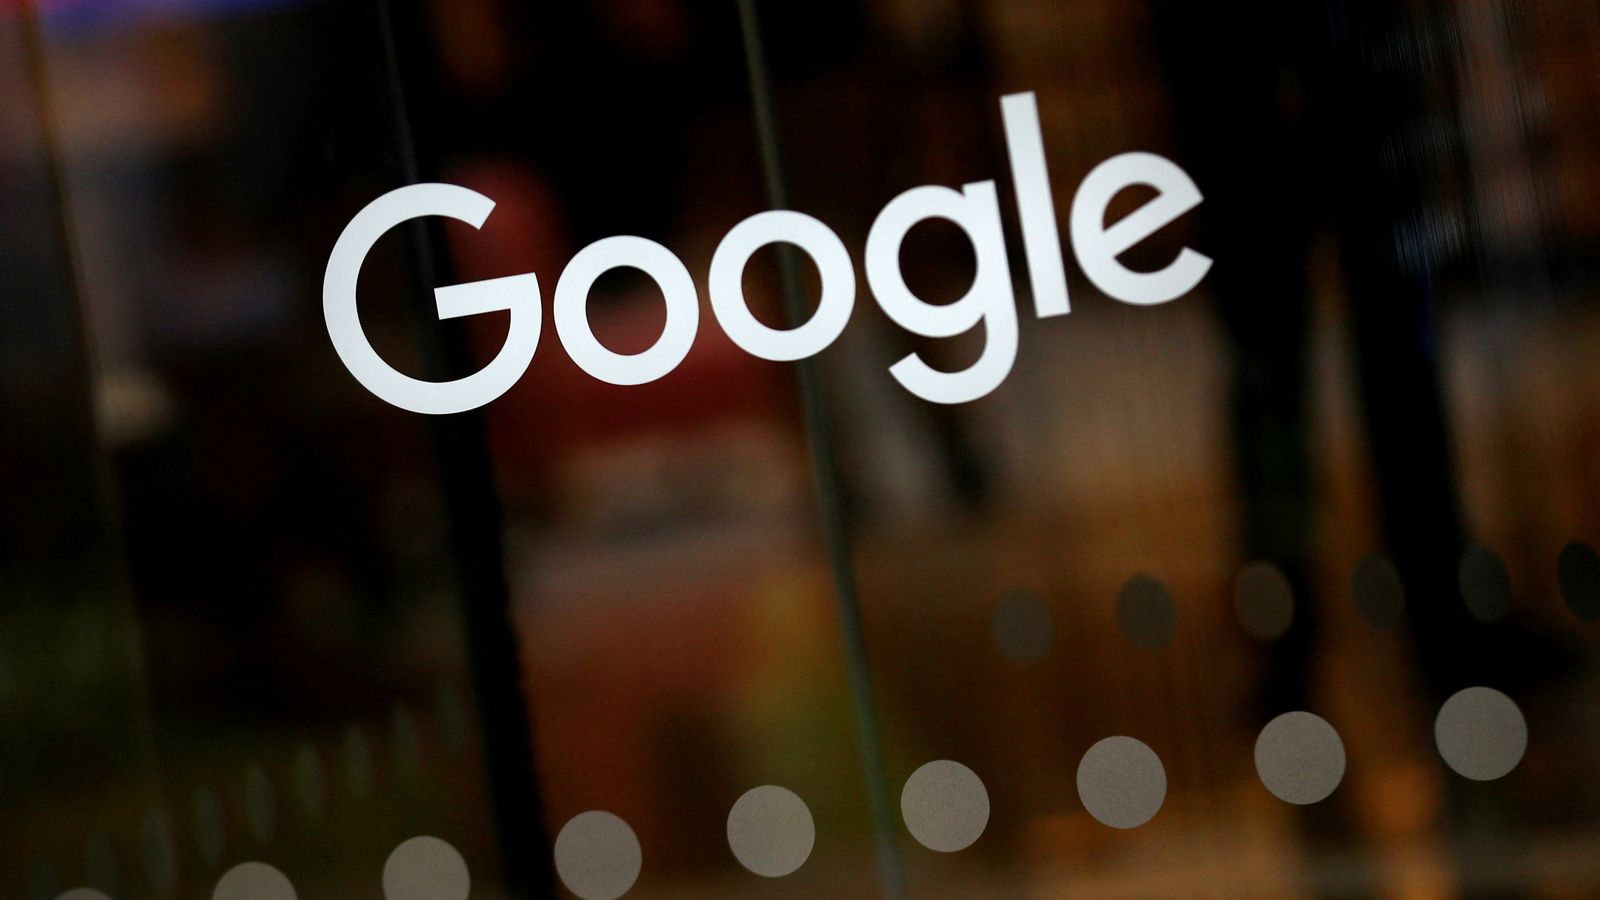 Google paves way to expand UK workforce with £730m office investment